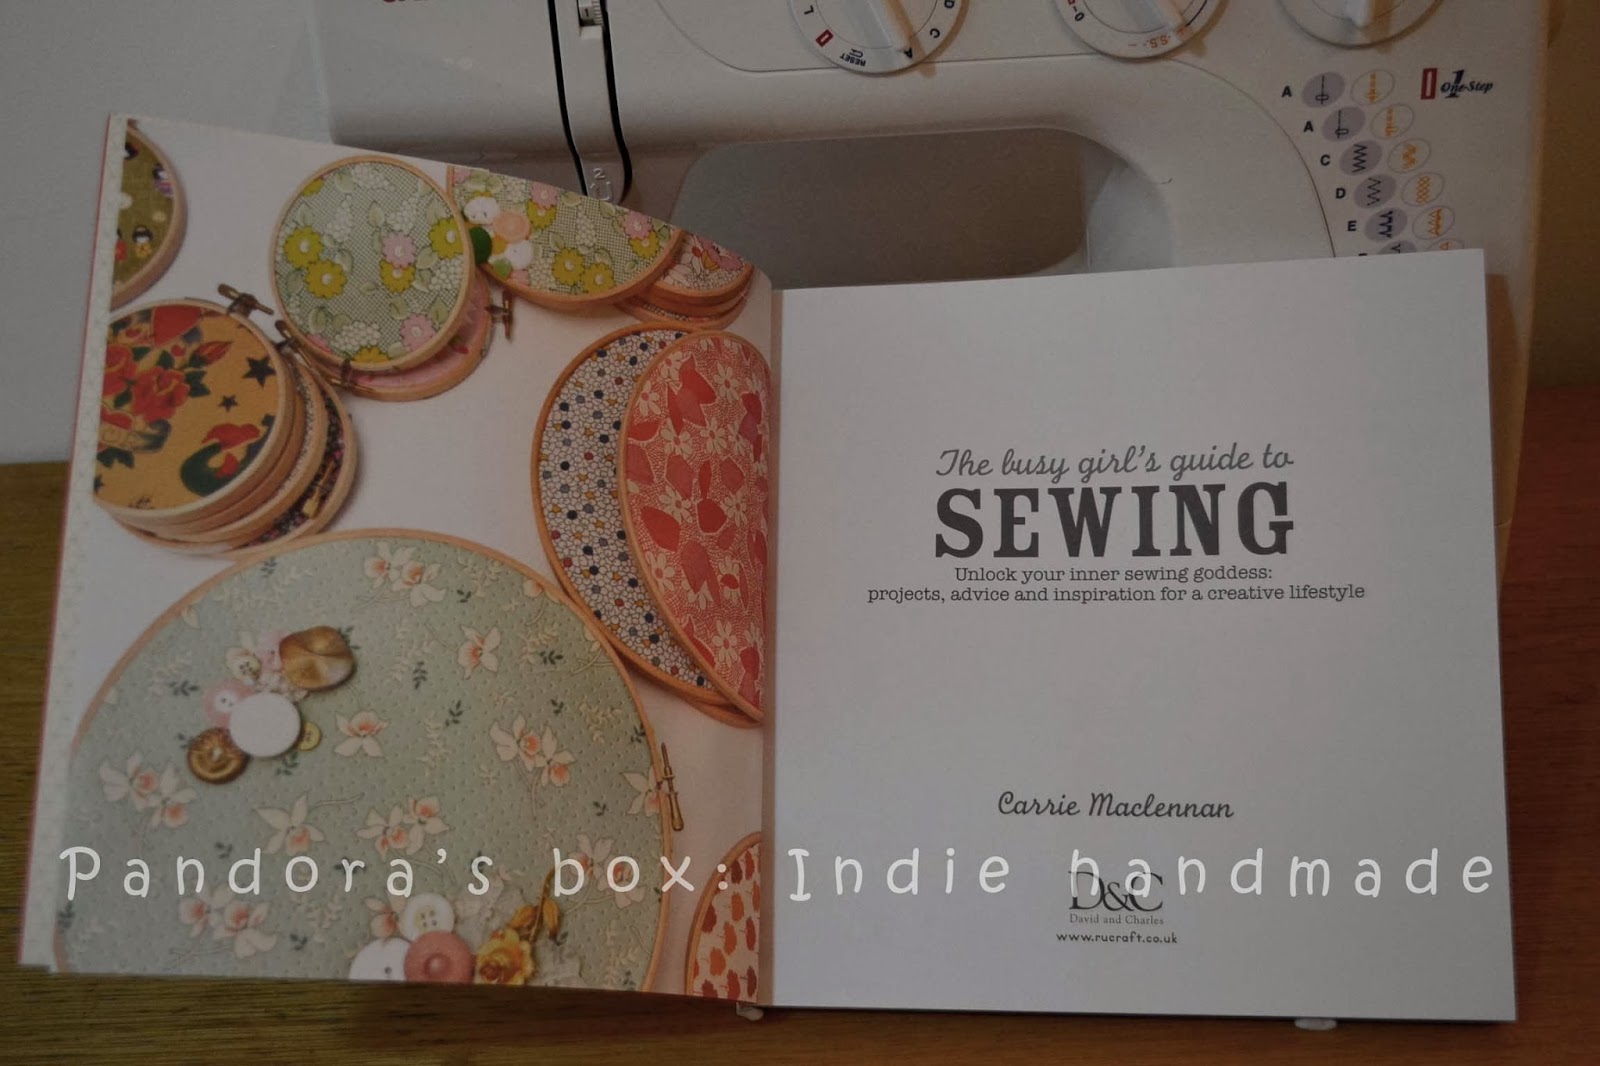 Book review: The busy girl's guide to sewing